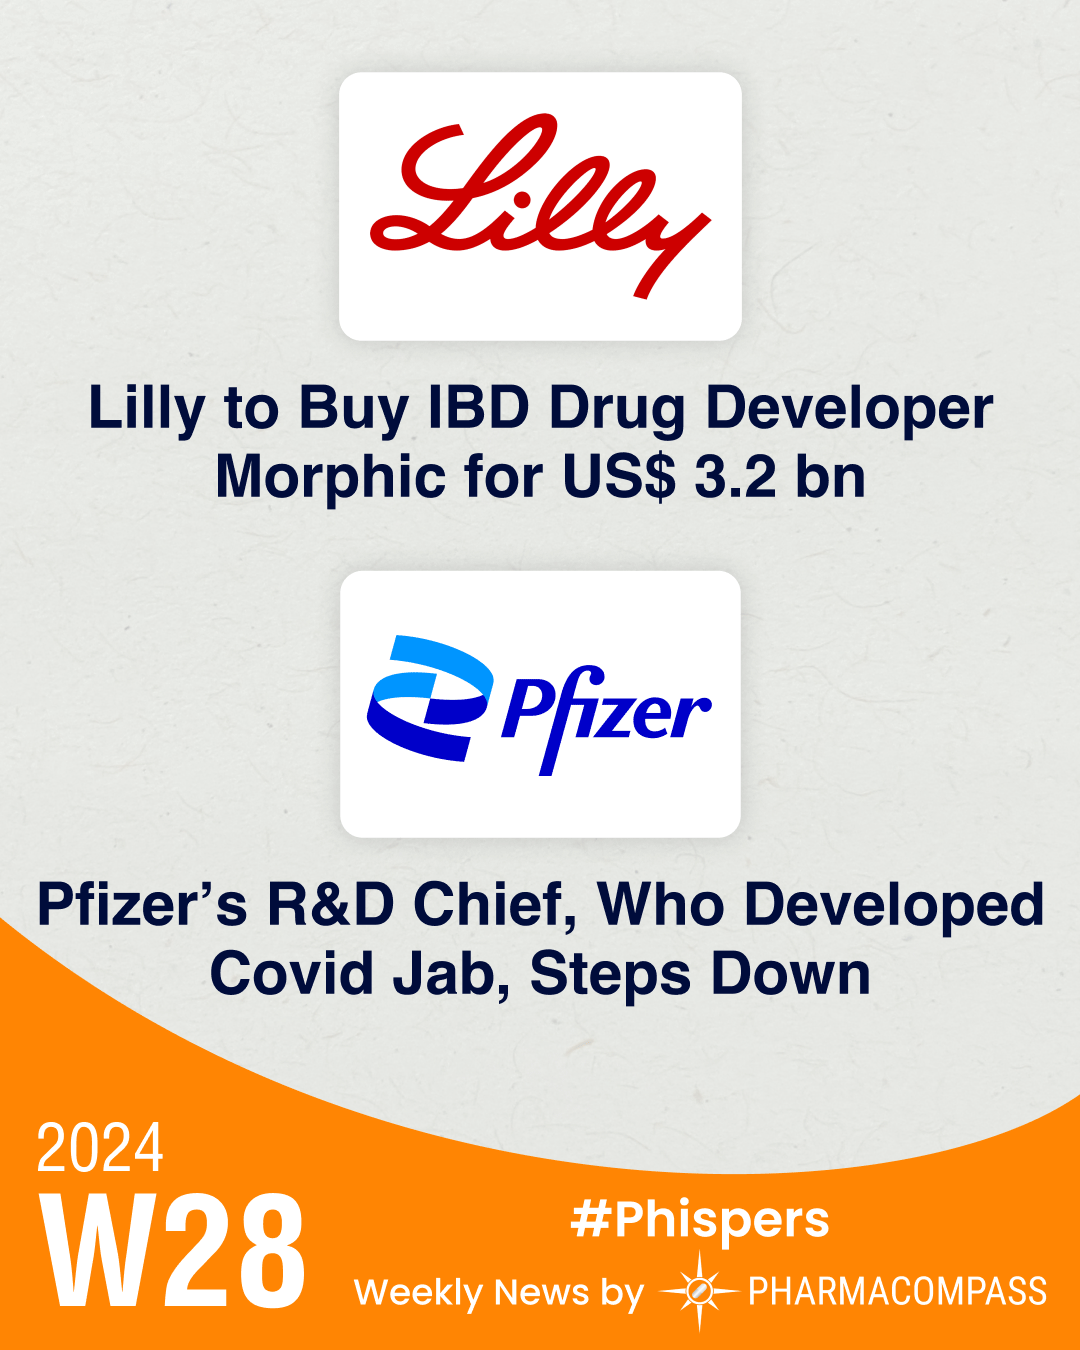 Lilly to acquire IBD drug developer Morphic for US$ 3.2 bn; Pfizer’s R&D chief to step down